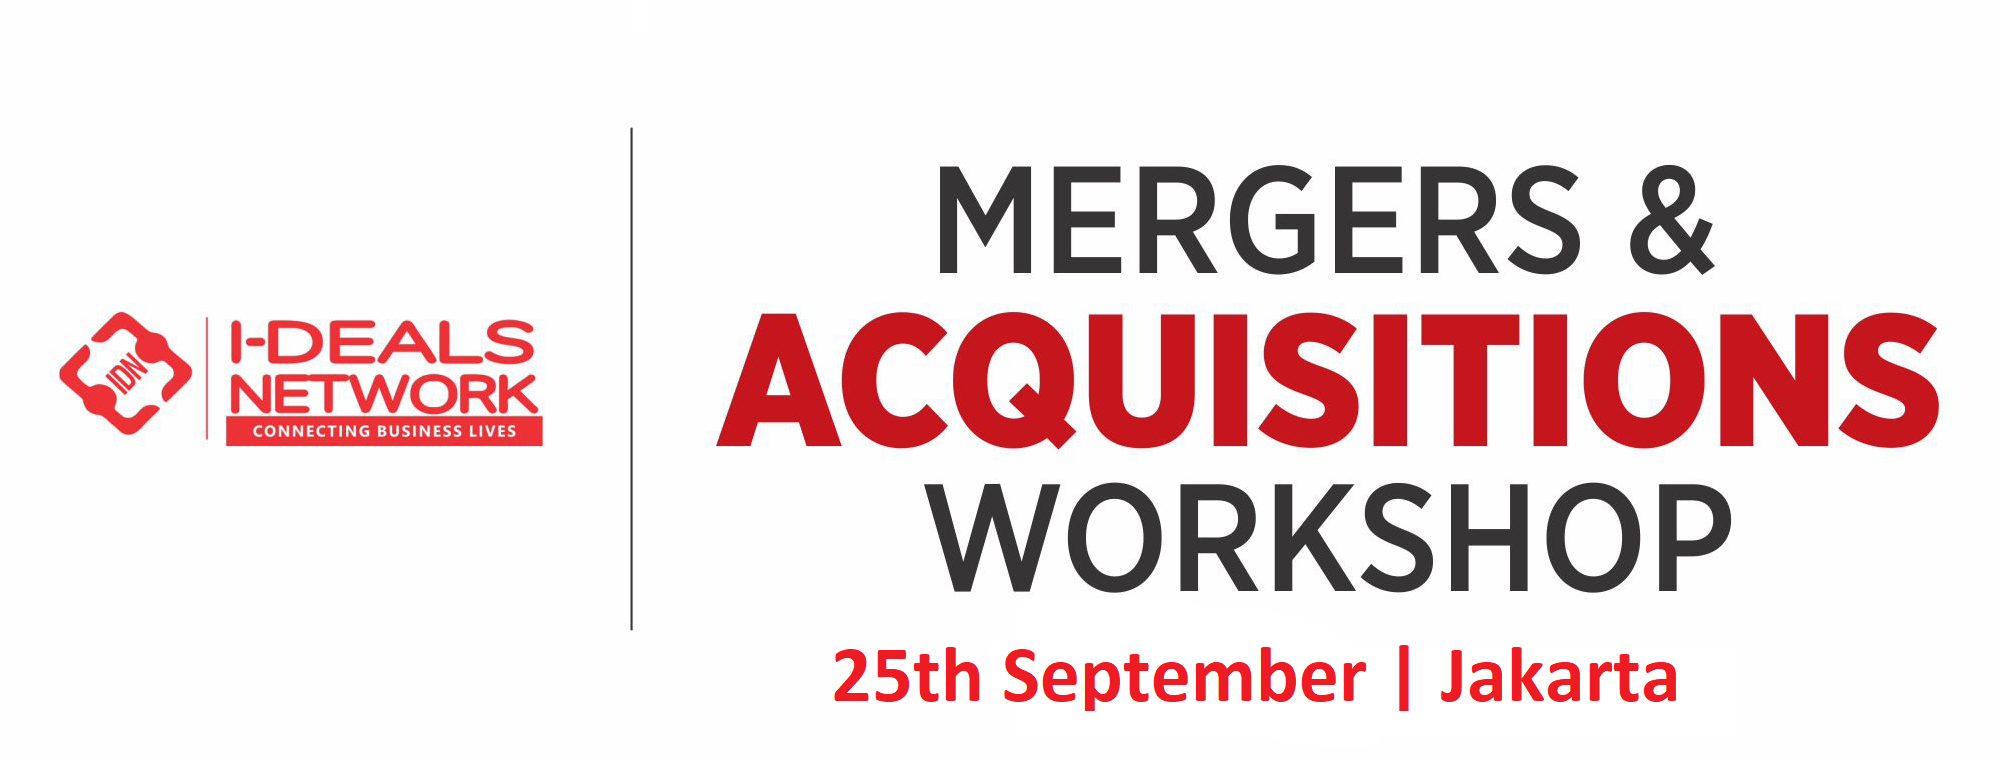 Mergers And Acquisitions workshop